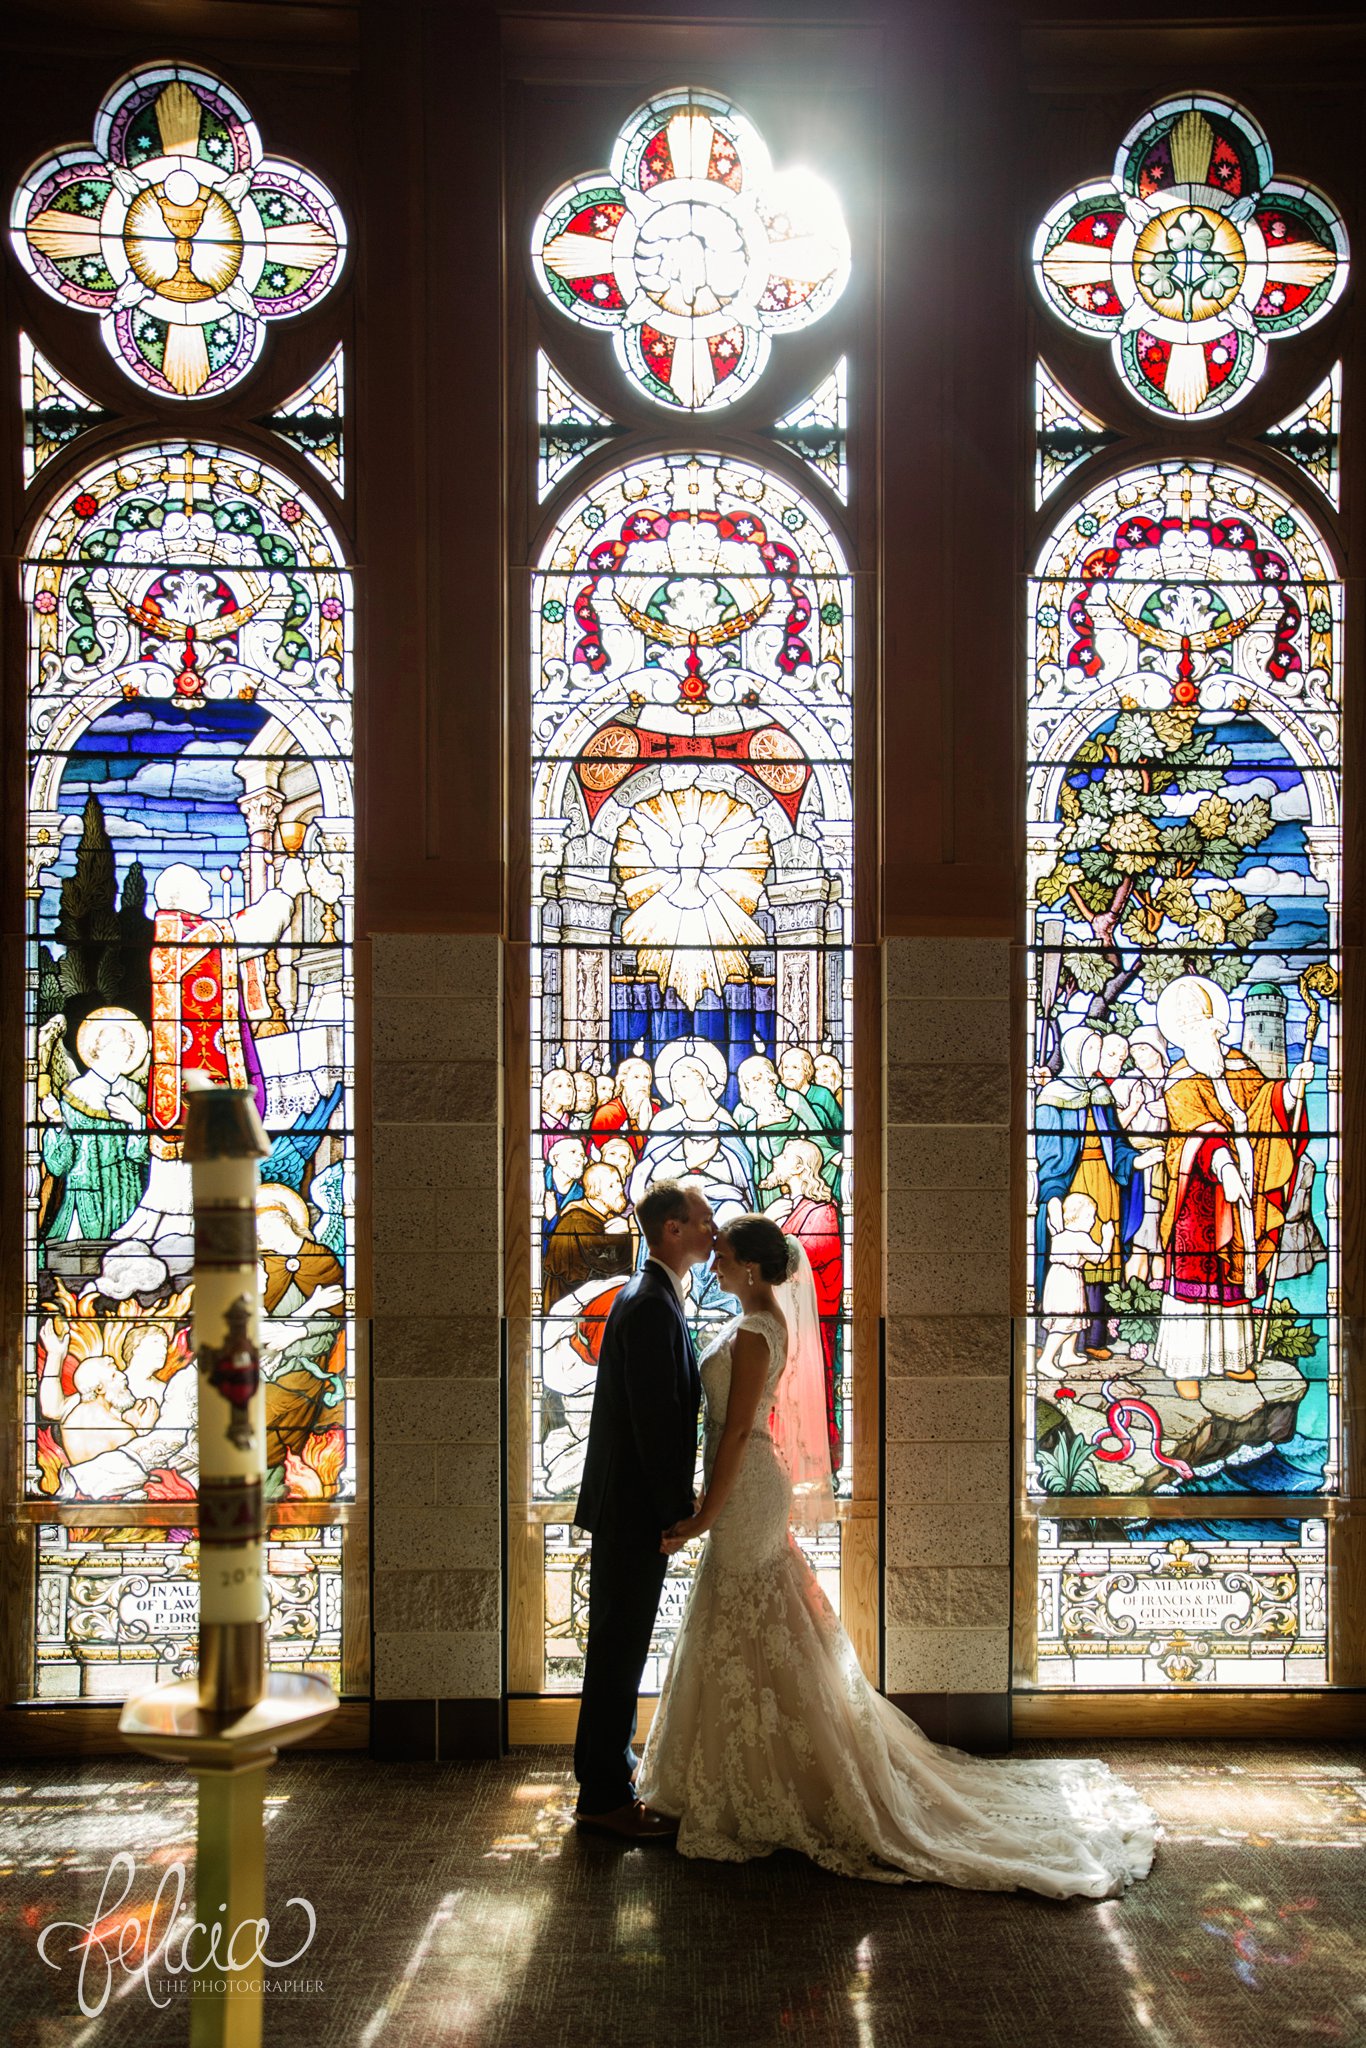 Wedding | Wedding Photography | Wedding Photos | Felicia the Photographer | Images by feliciathephotographer.com | Travel Photographer | Duluth | St. Benedict Church | Stained Glass Windows | Sun Flare | Bride and Groom Portrait | Forehead Kiss | Profile 